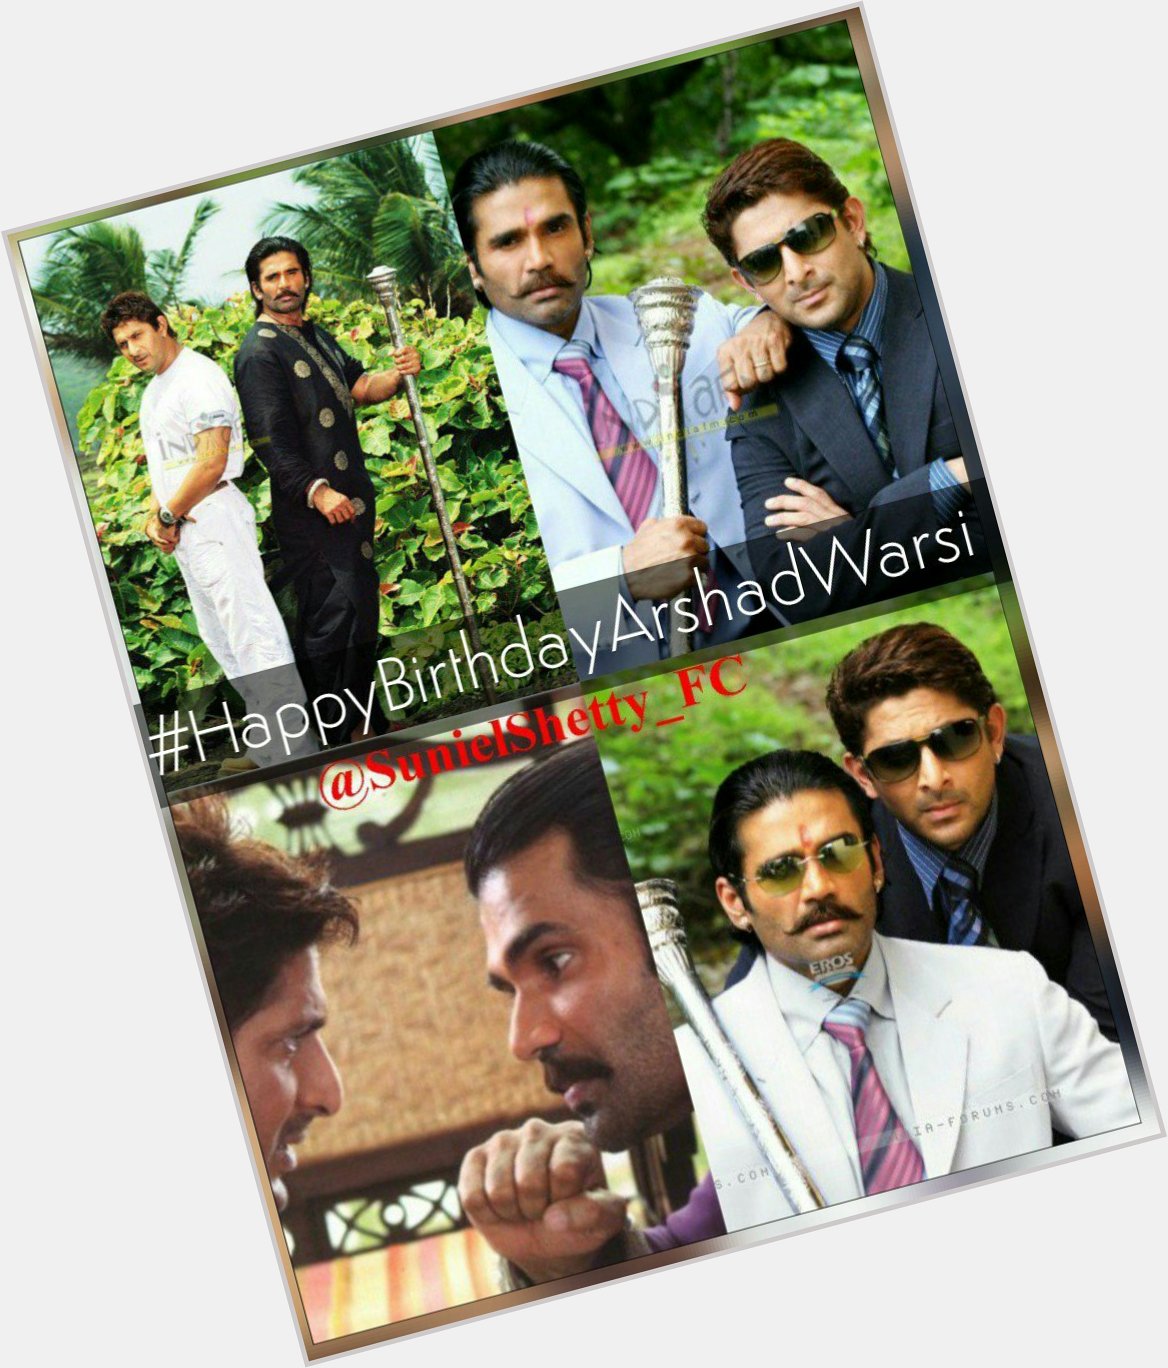 Wishes a very Happy birthday to Arshad Warsi .. and .. 